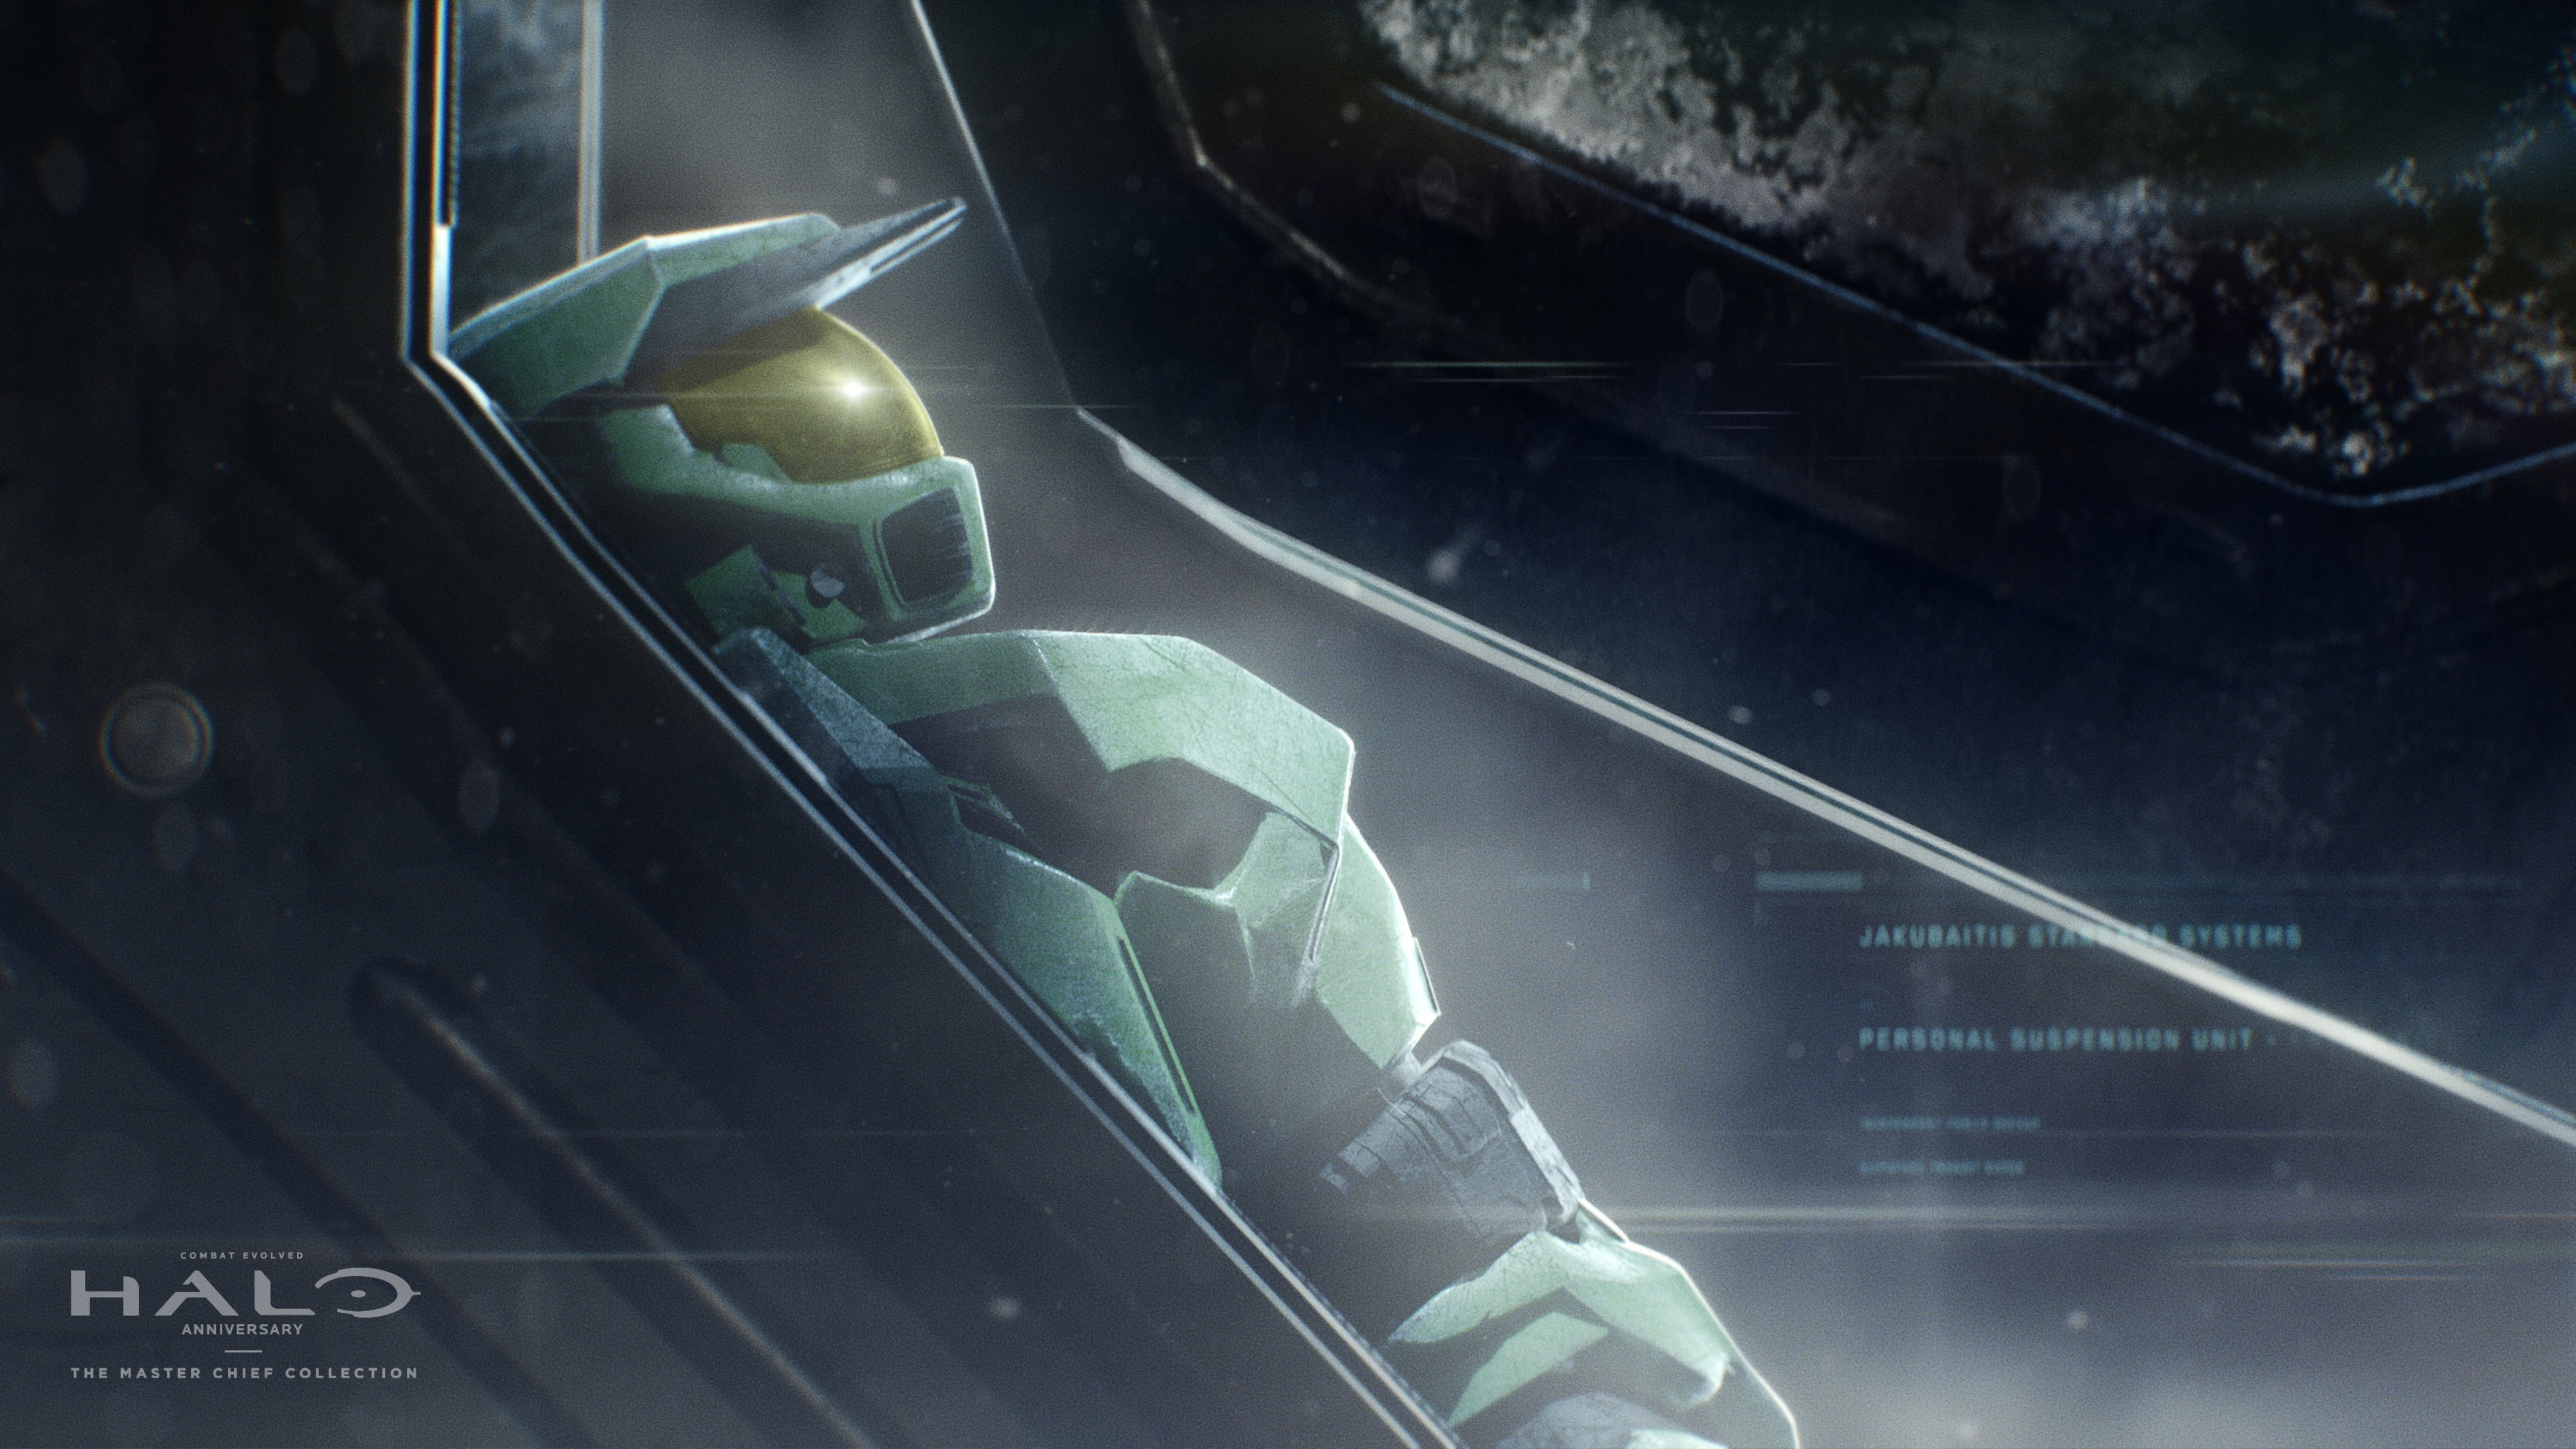 Halo Halo The Master Chief Collection 3840x2160